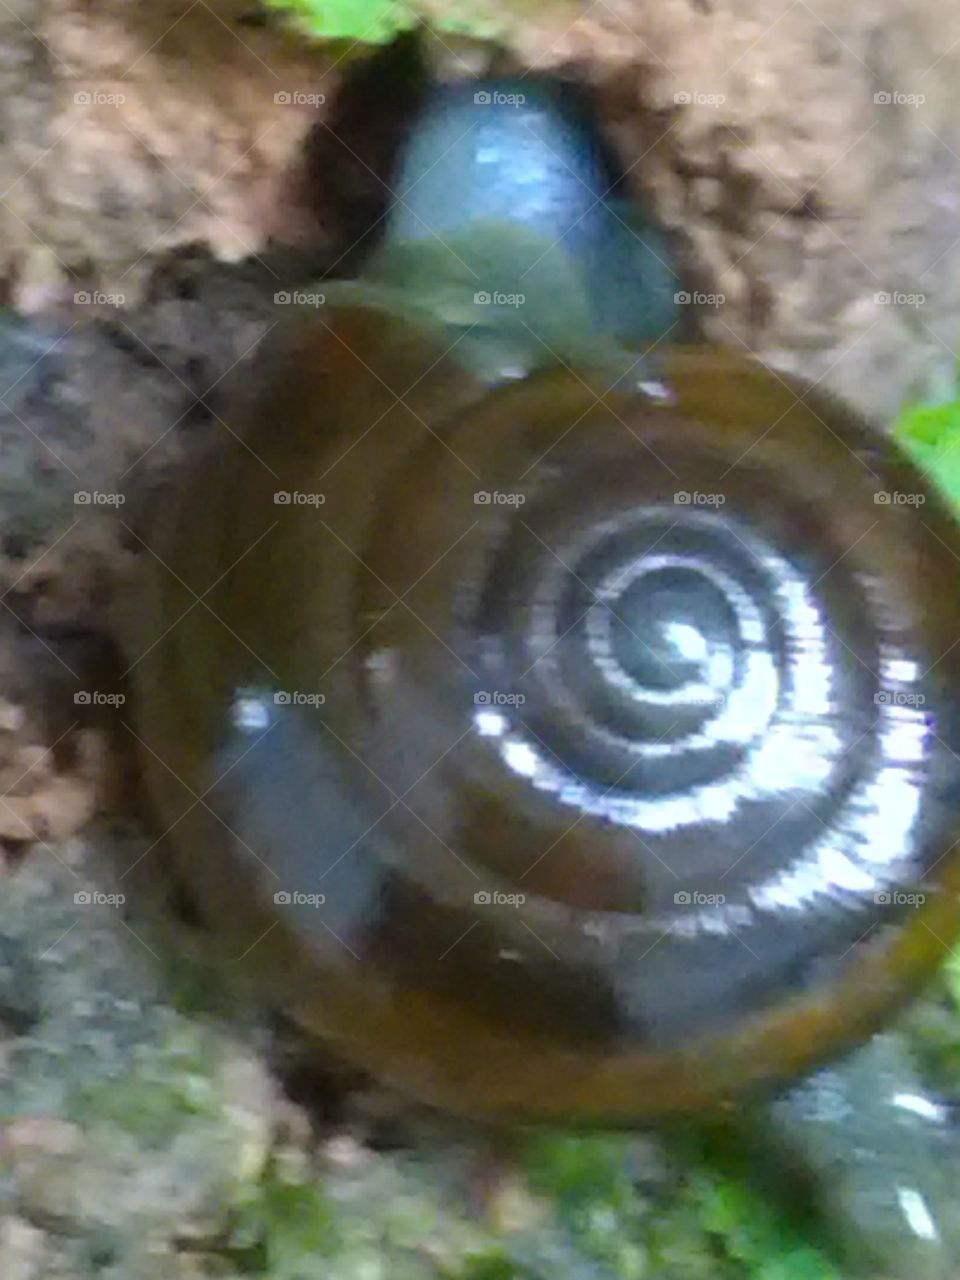 Because of the very beautiful, simple and peaceful nature of the creatures, this number of animals is increasing.snail.